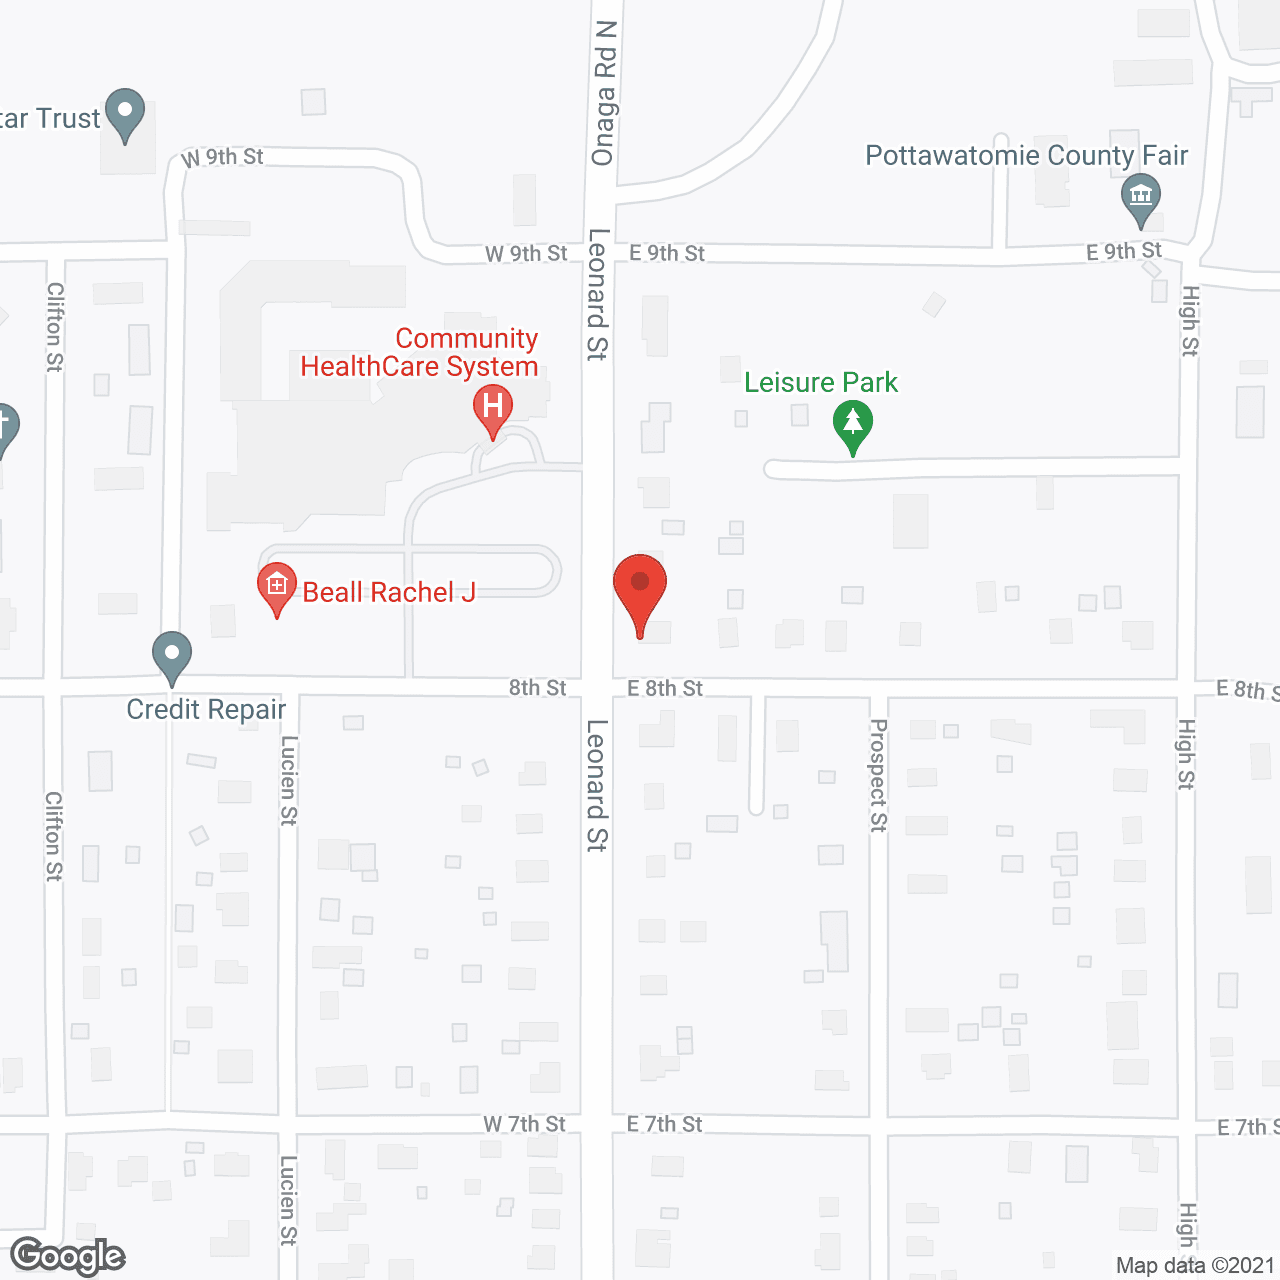 Community Home Health in google map